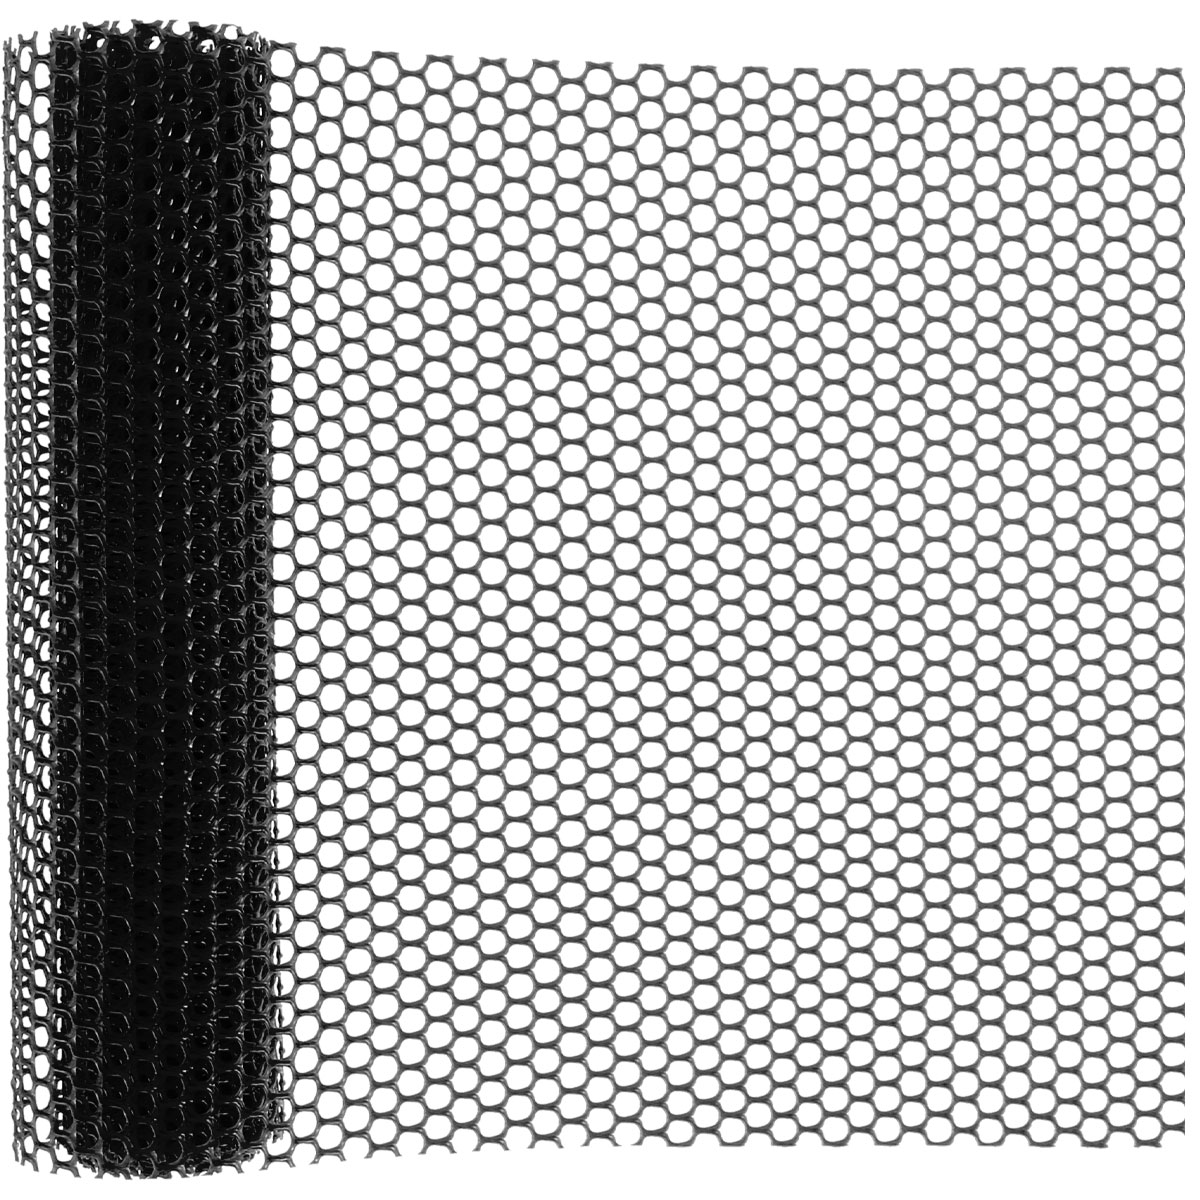 EUWBSSR Plastic Mesh Fence Construction Barrier Netting 118X15.7 inch  Chicken Mesh Durable and Lightweight Fencing Roll Wire Frame Floral Netting  Crafts Gardening Poultry Fencing Green/Black 